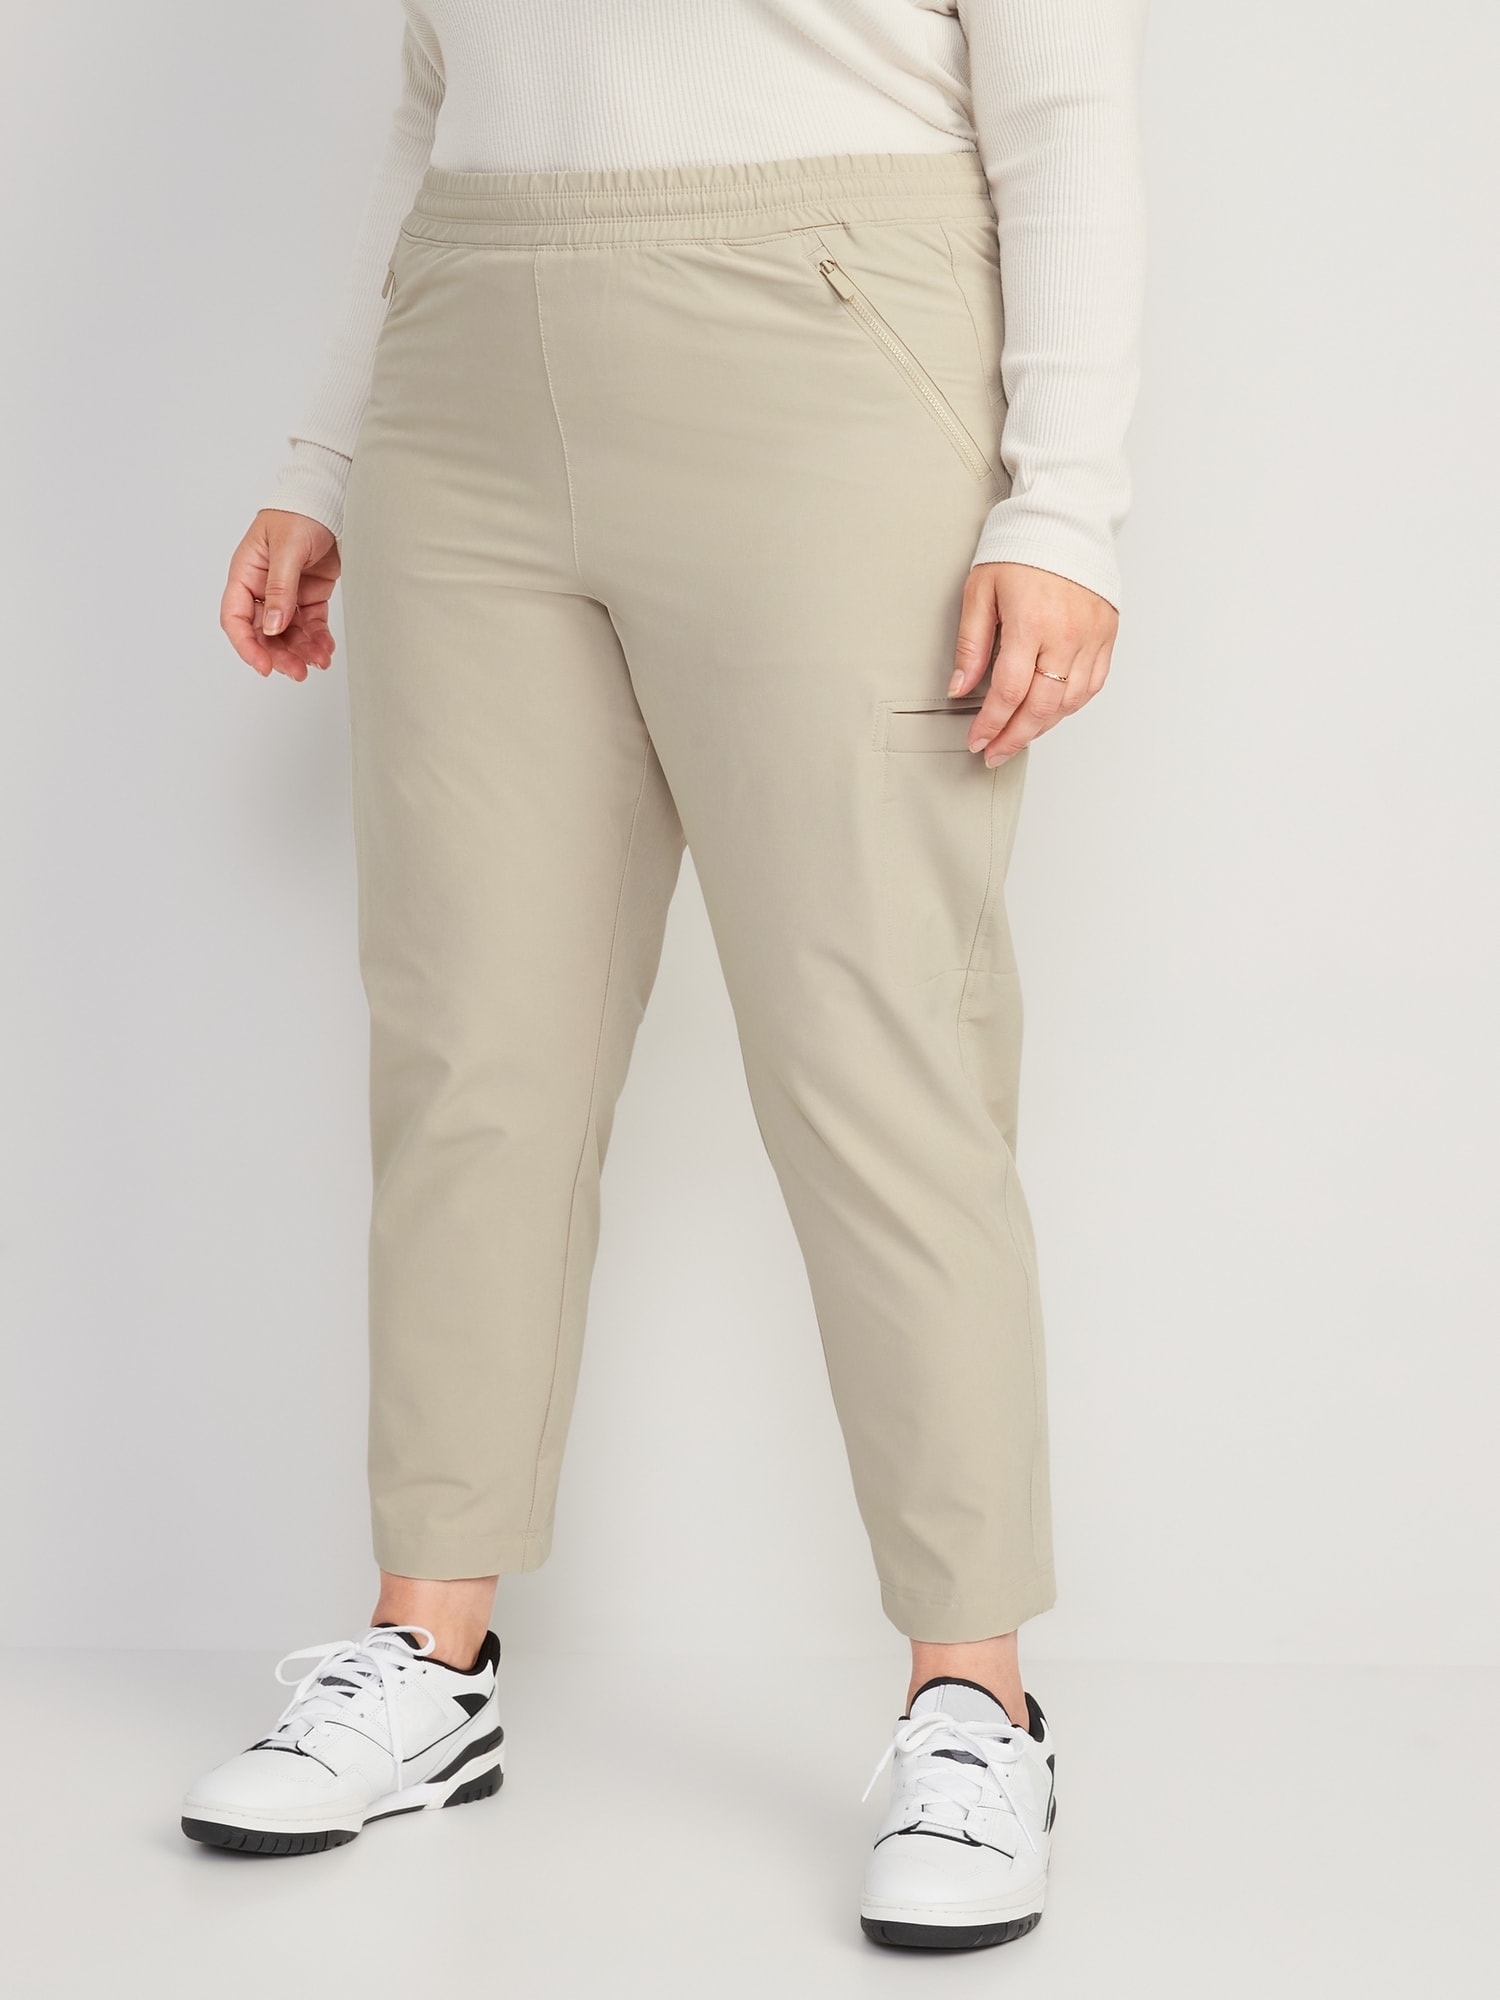 High-Waisted All-Seasons StretchTech Slouchy Taper Cargo Pants for